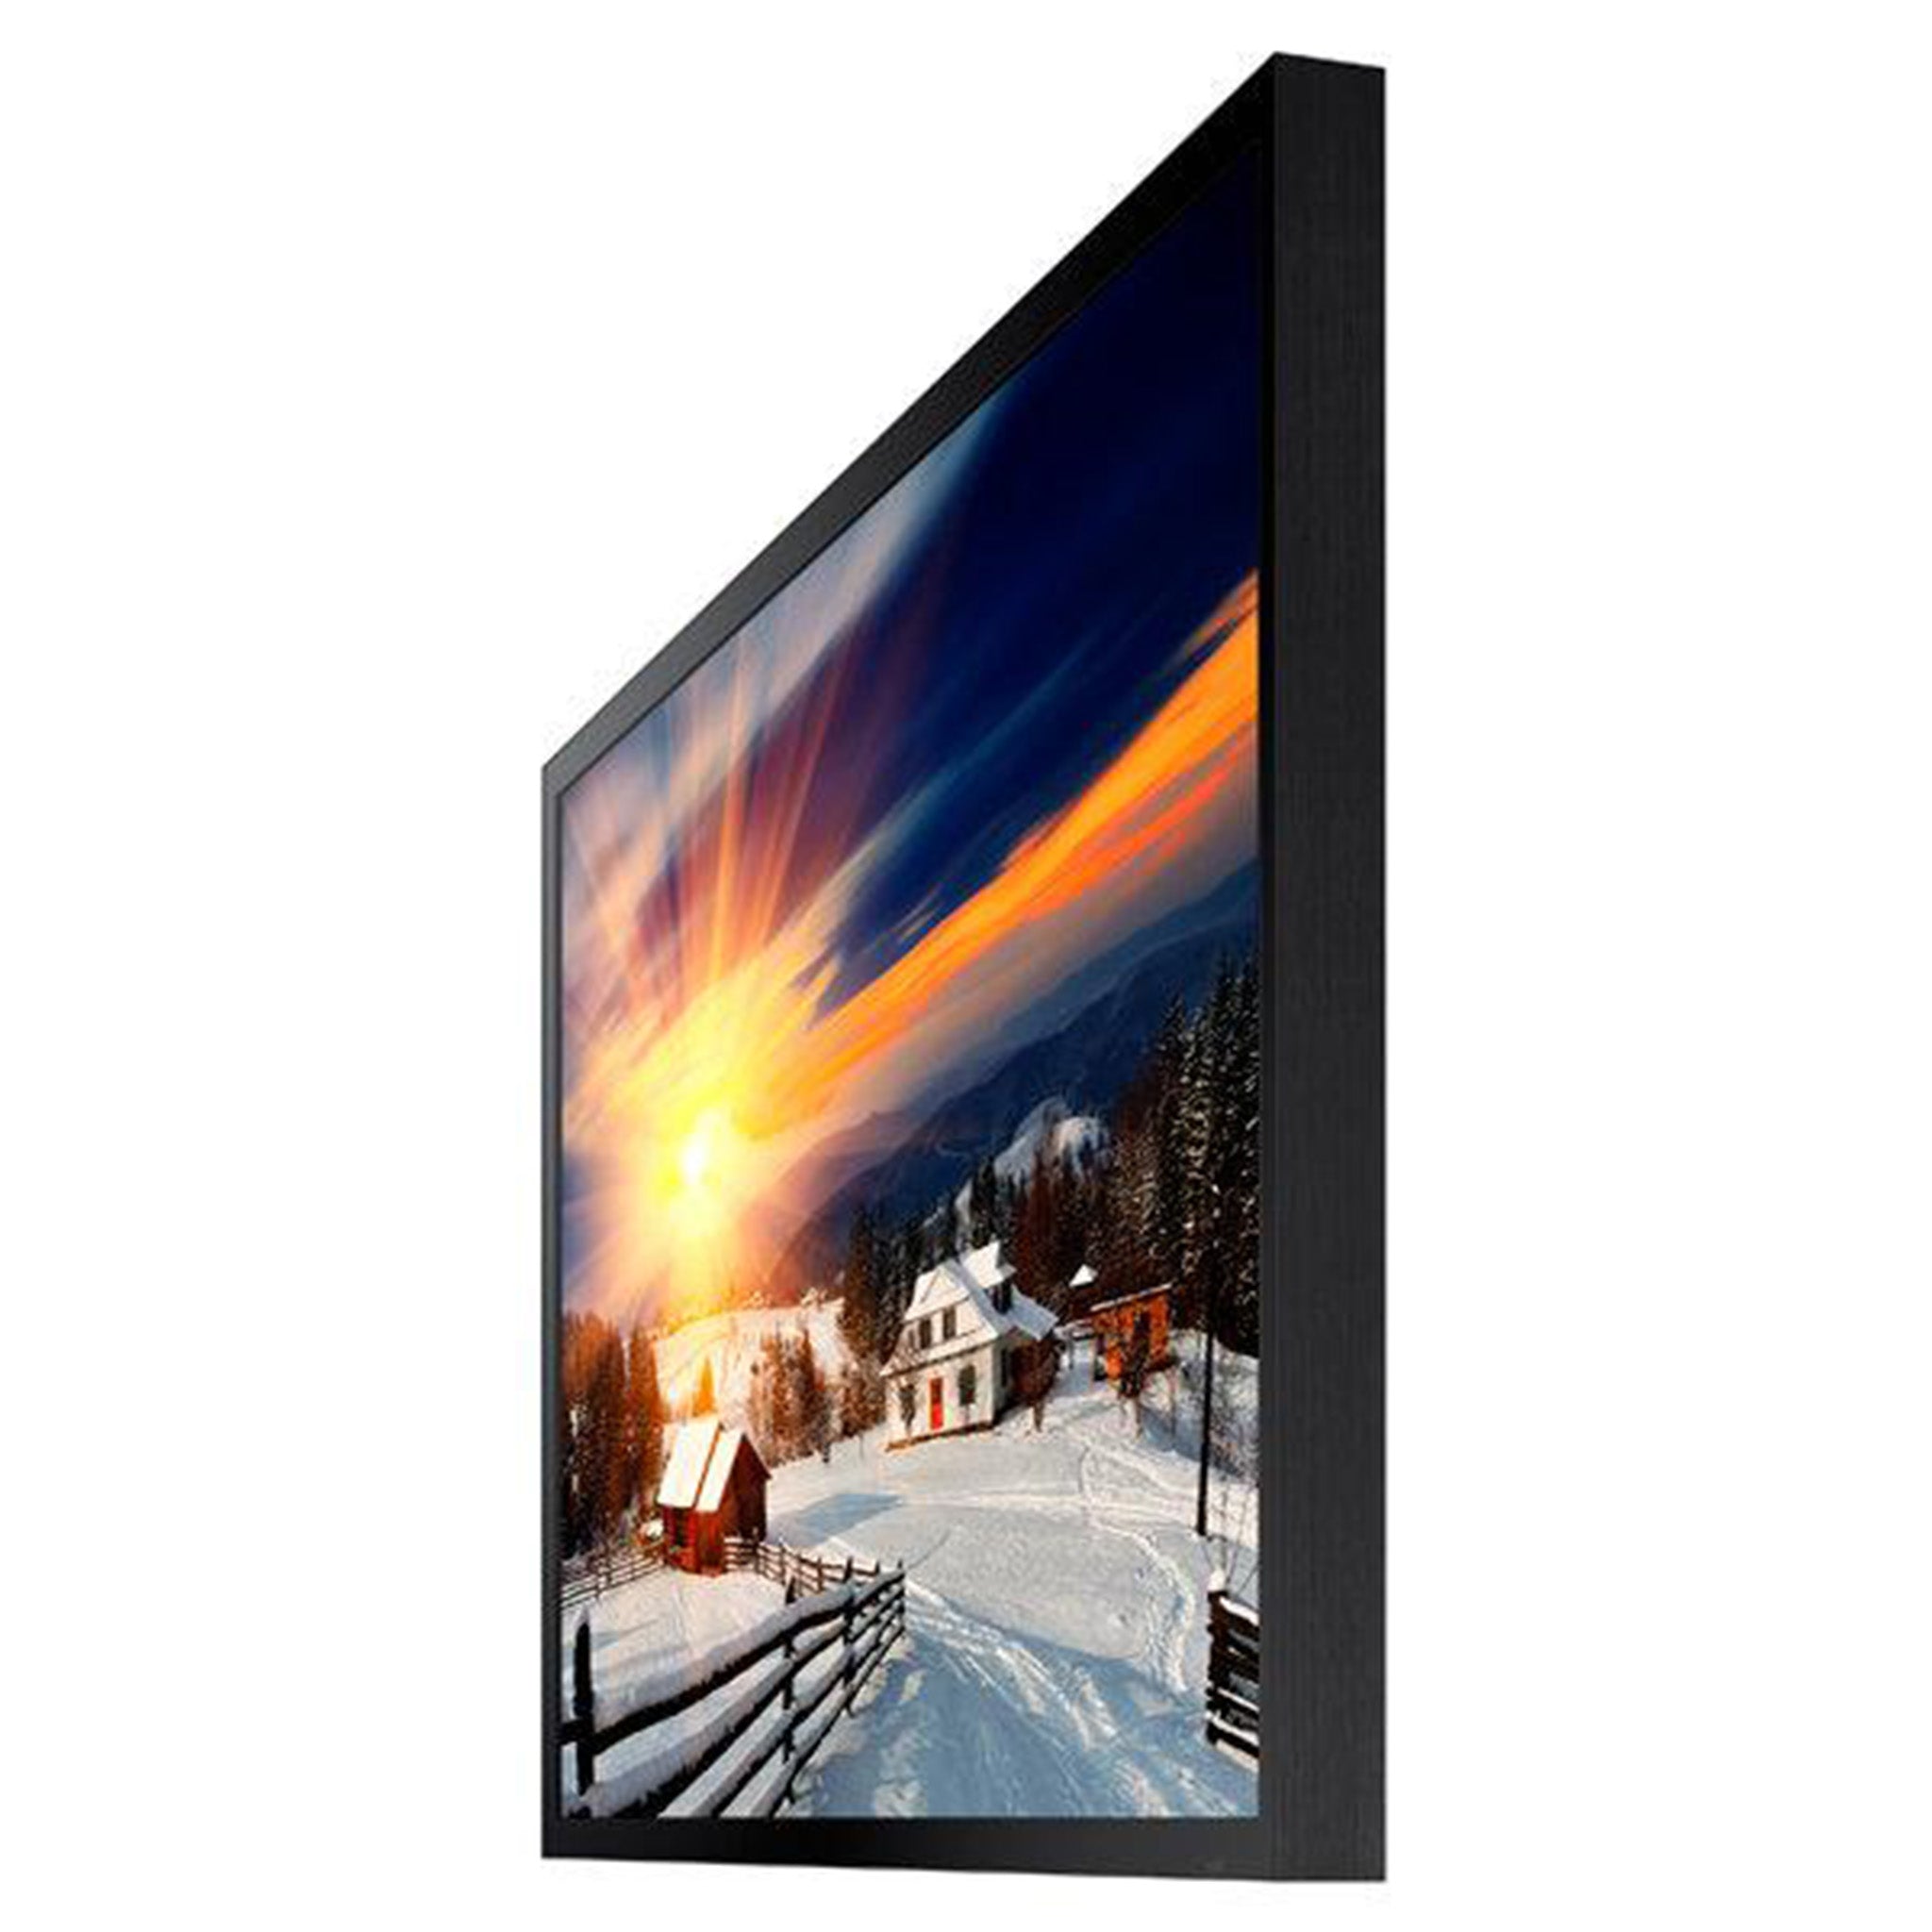 Samsung OH-F Series - High Brightness Signage Display for Outdoor Usage - 46" / 55" / 75" / 85"